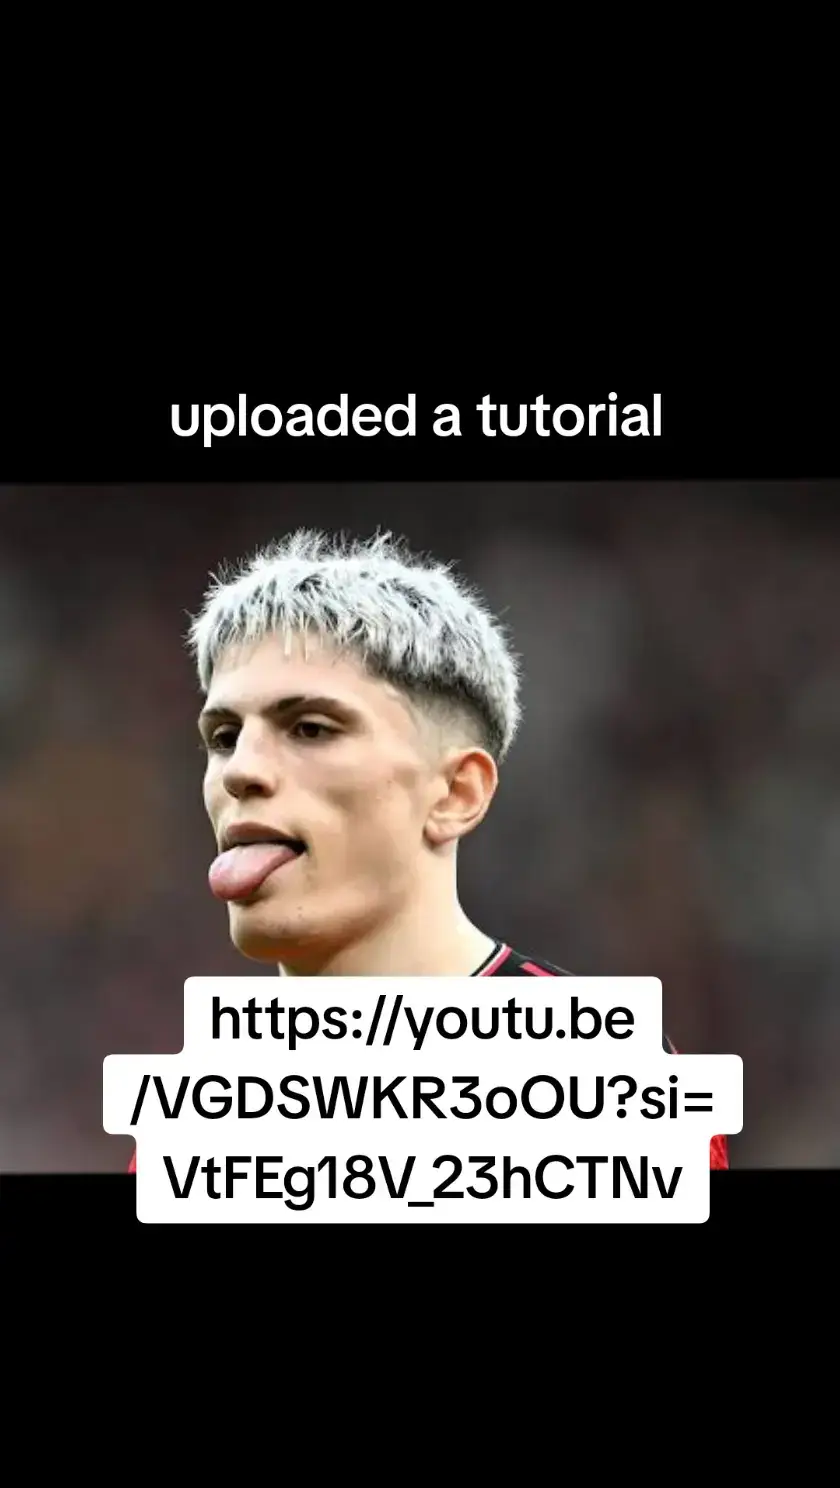 uploaded a tutorial go check out guys